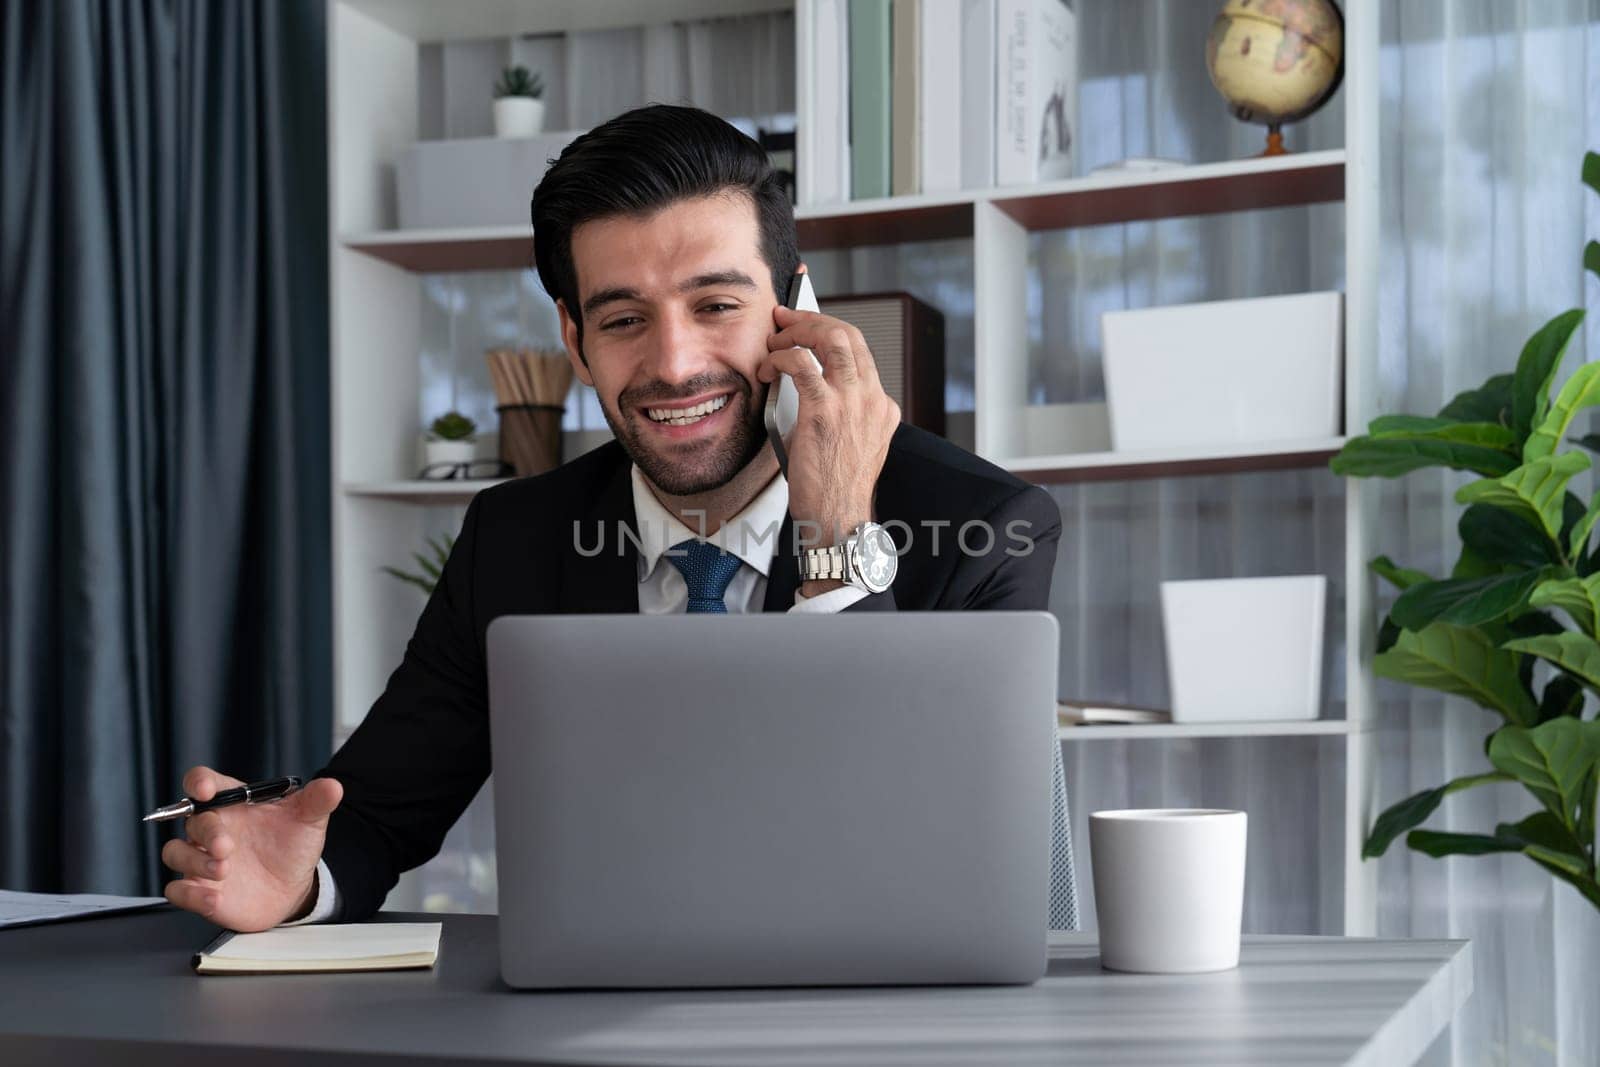 Diligent businessman busy talking on the phone call with clients while working with laptop in his office as concept of modern hardworking office worker lifestyle with mobile phone. Fervent